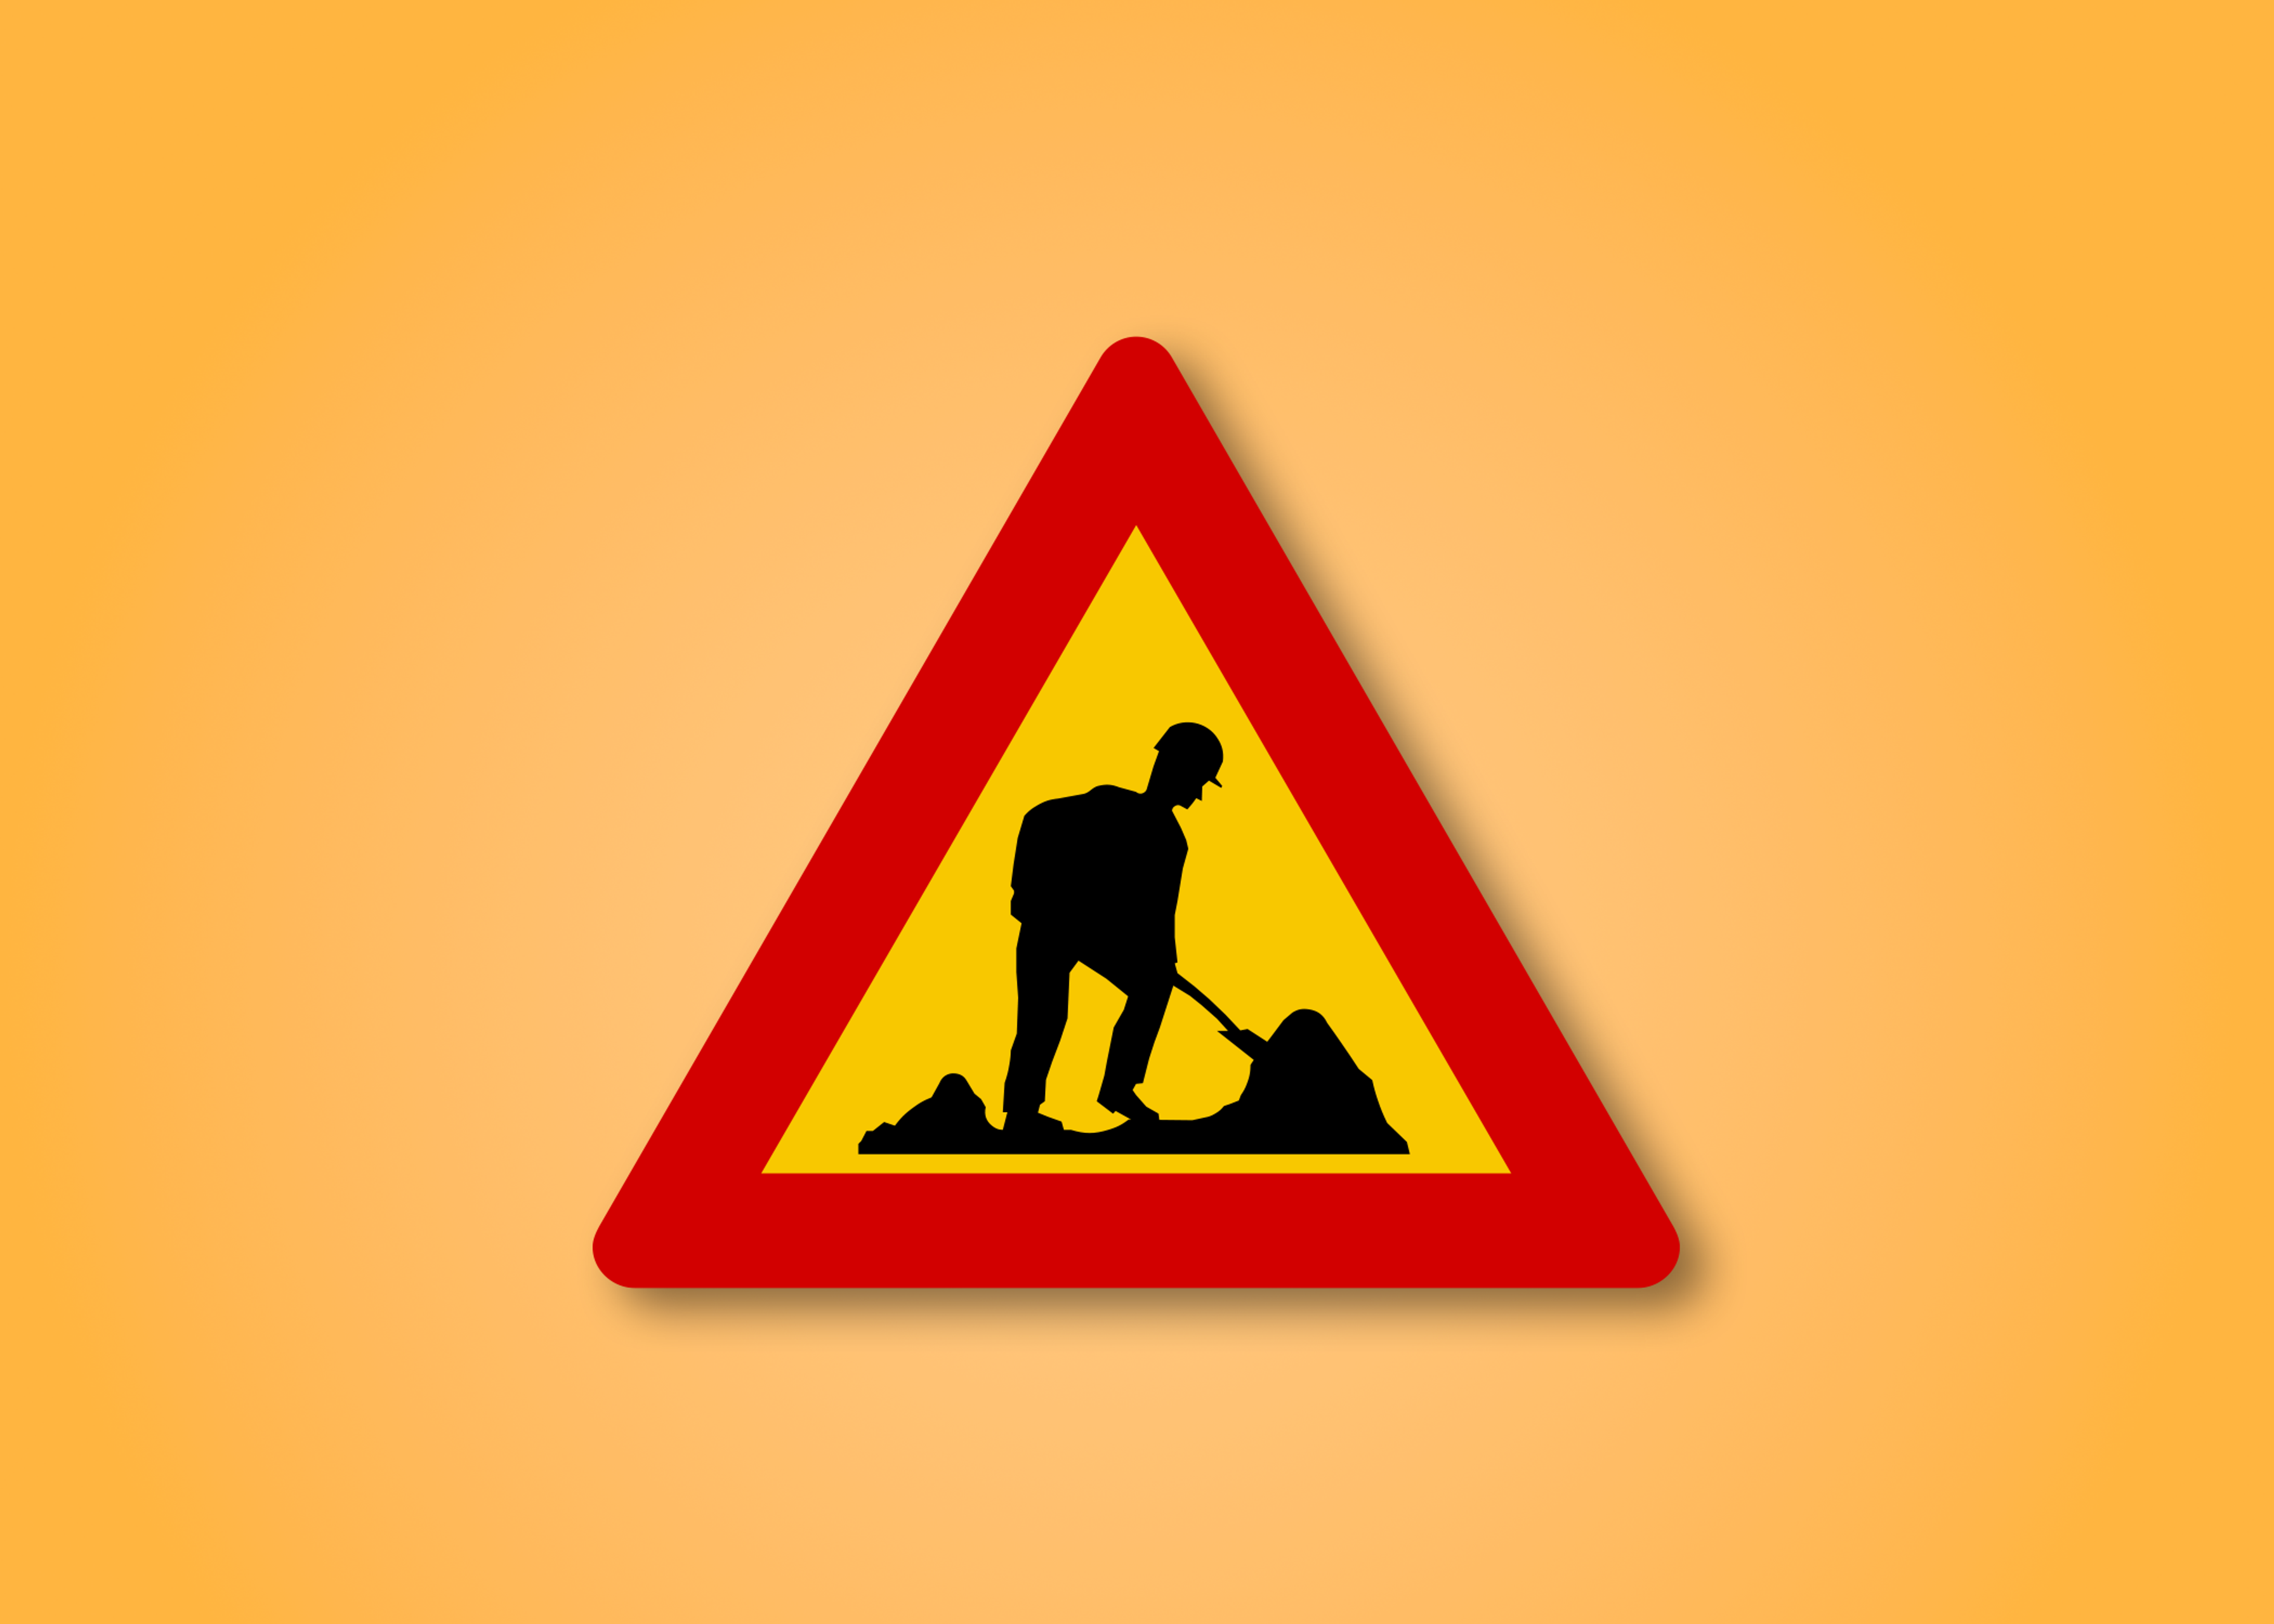 Red and yellow triangle road sign with an Icelandic Worker in the middle. This road sign means Workers ahead